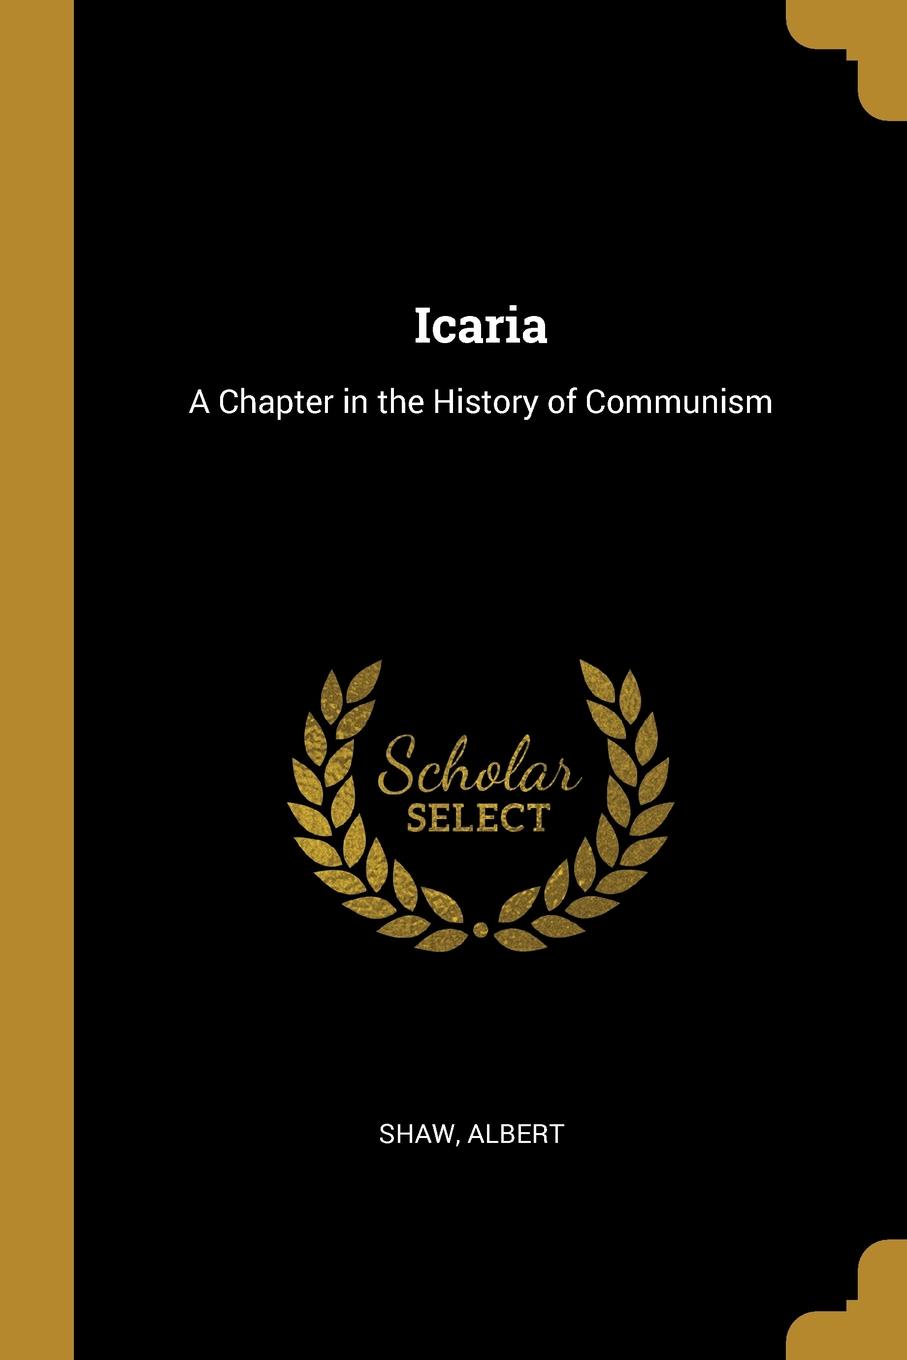 Icaria. A Chapter in the History of Communism